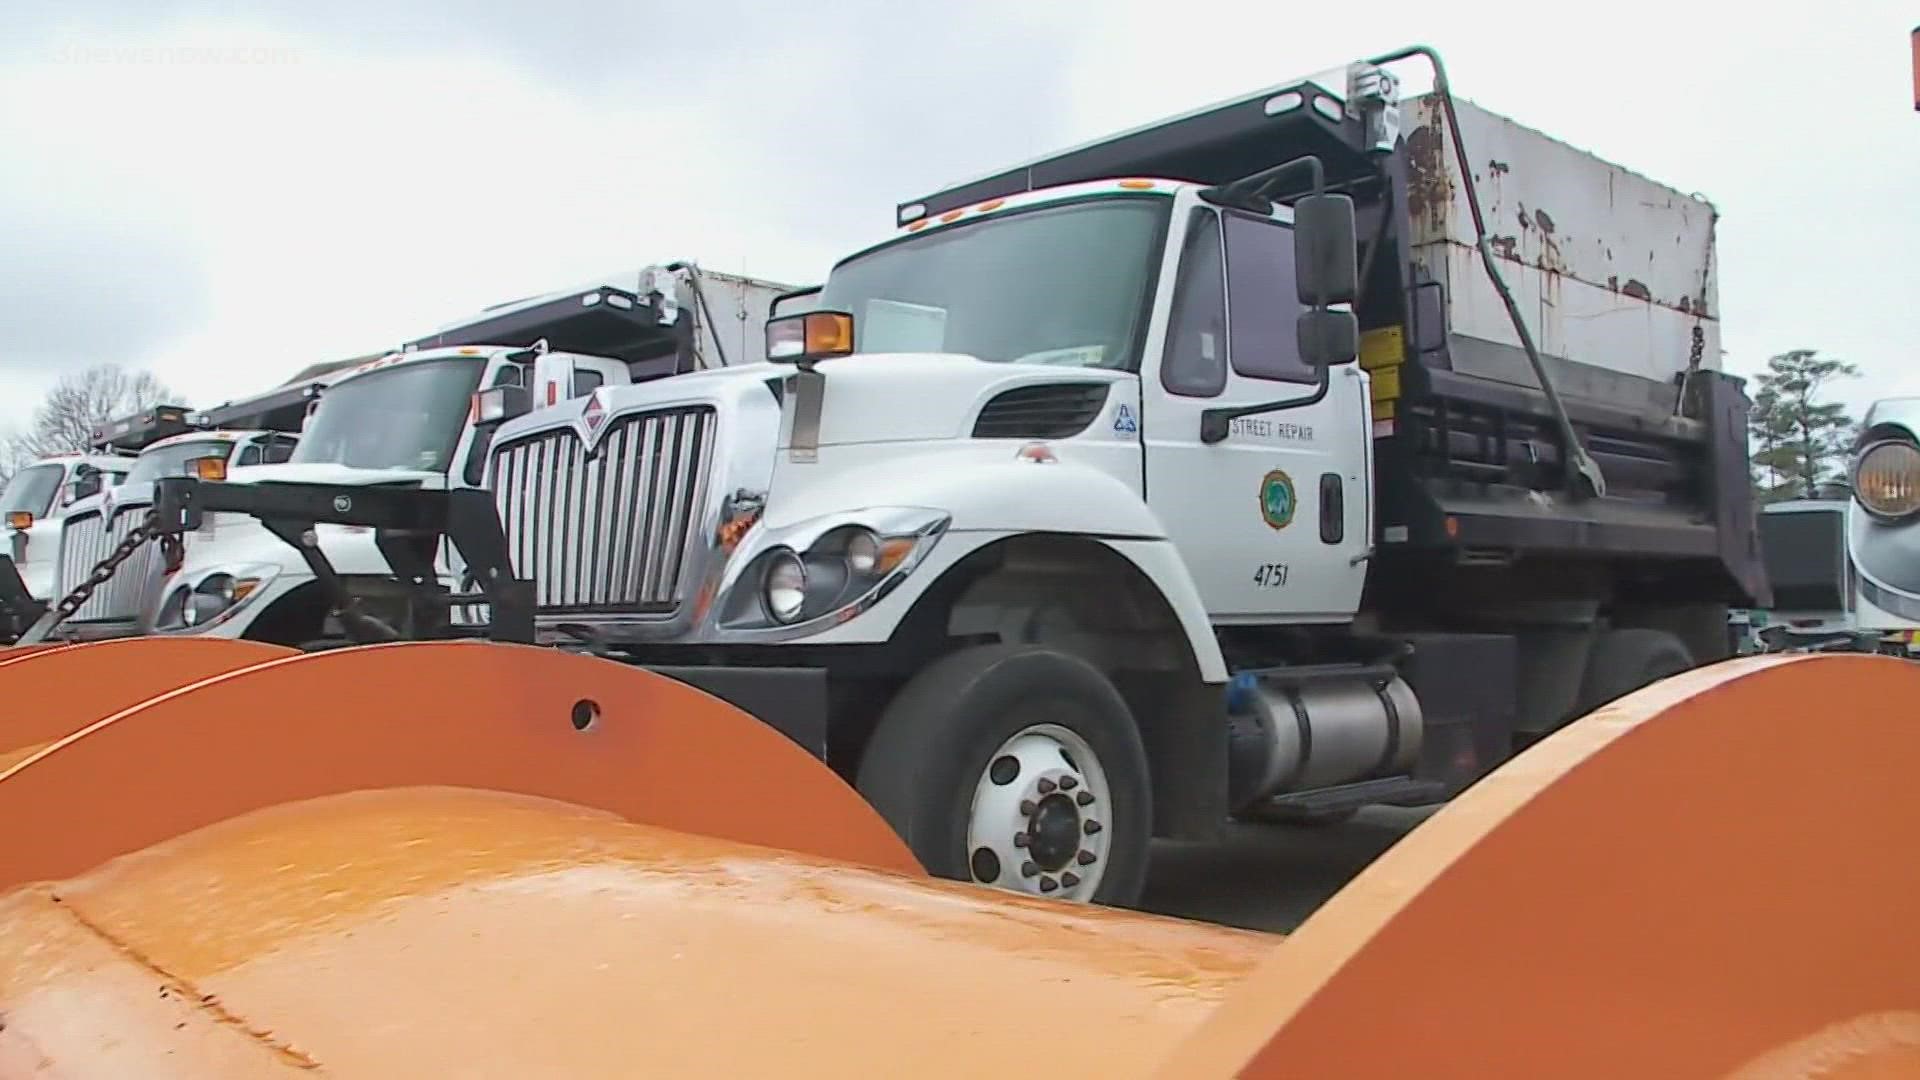 Public works crews in Newport News say they are ready to tackle the snow!